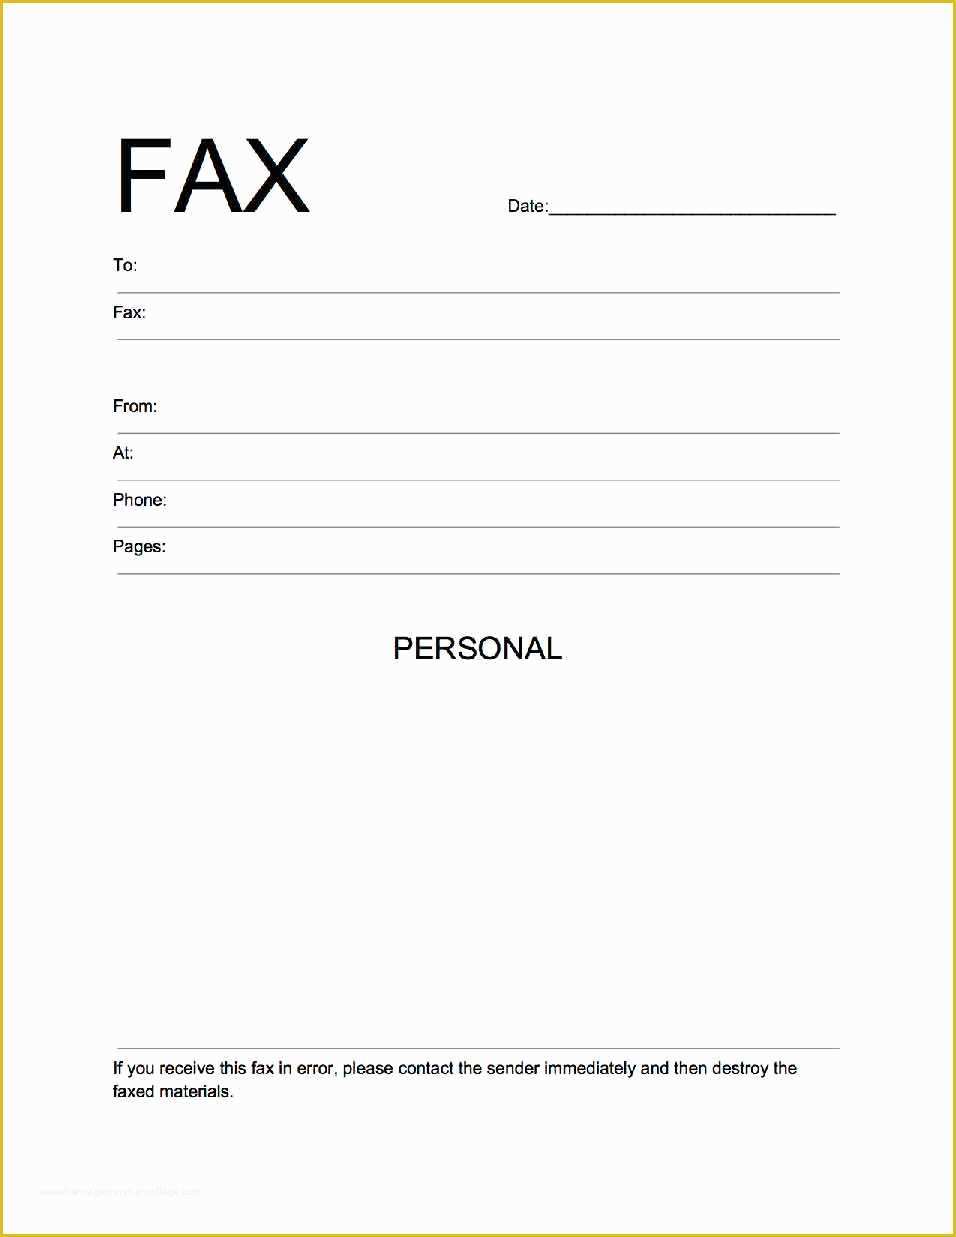 Fax Template Free Of Free Fax Cover Sheet Template Download